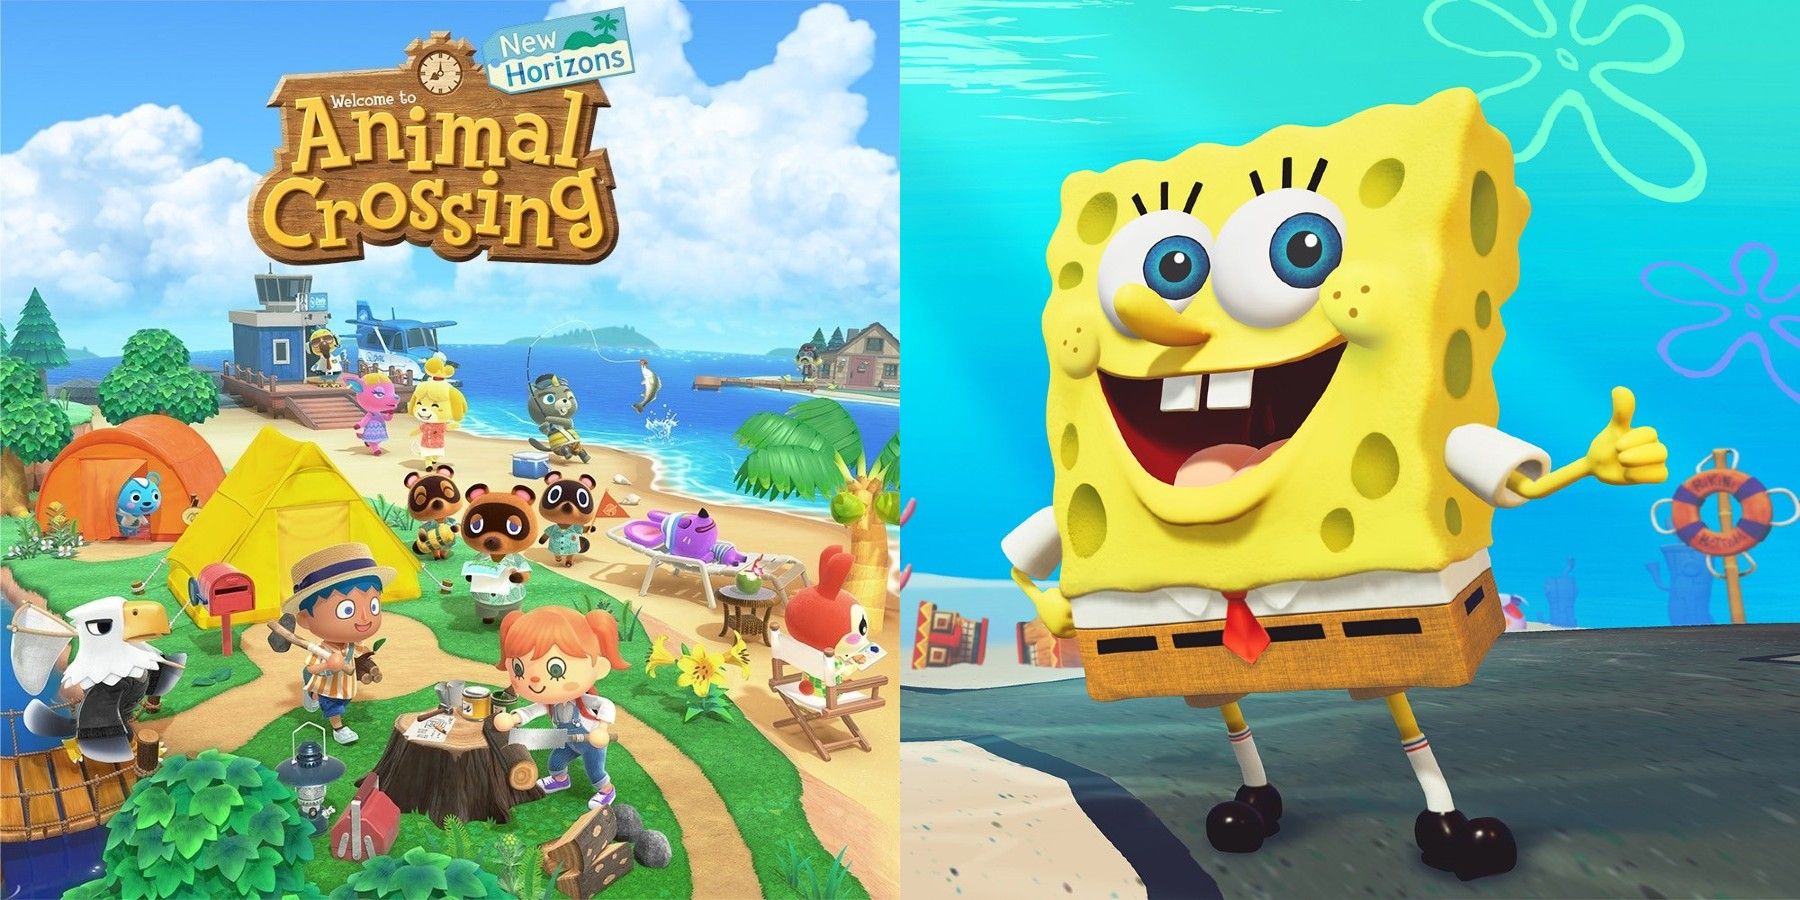 Animal Crossing New Horizons Fans Have Made Some Impressive SpongeBob Creations